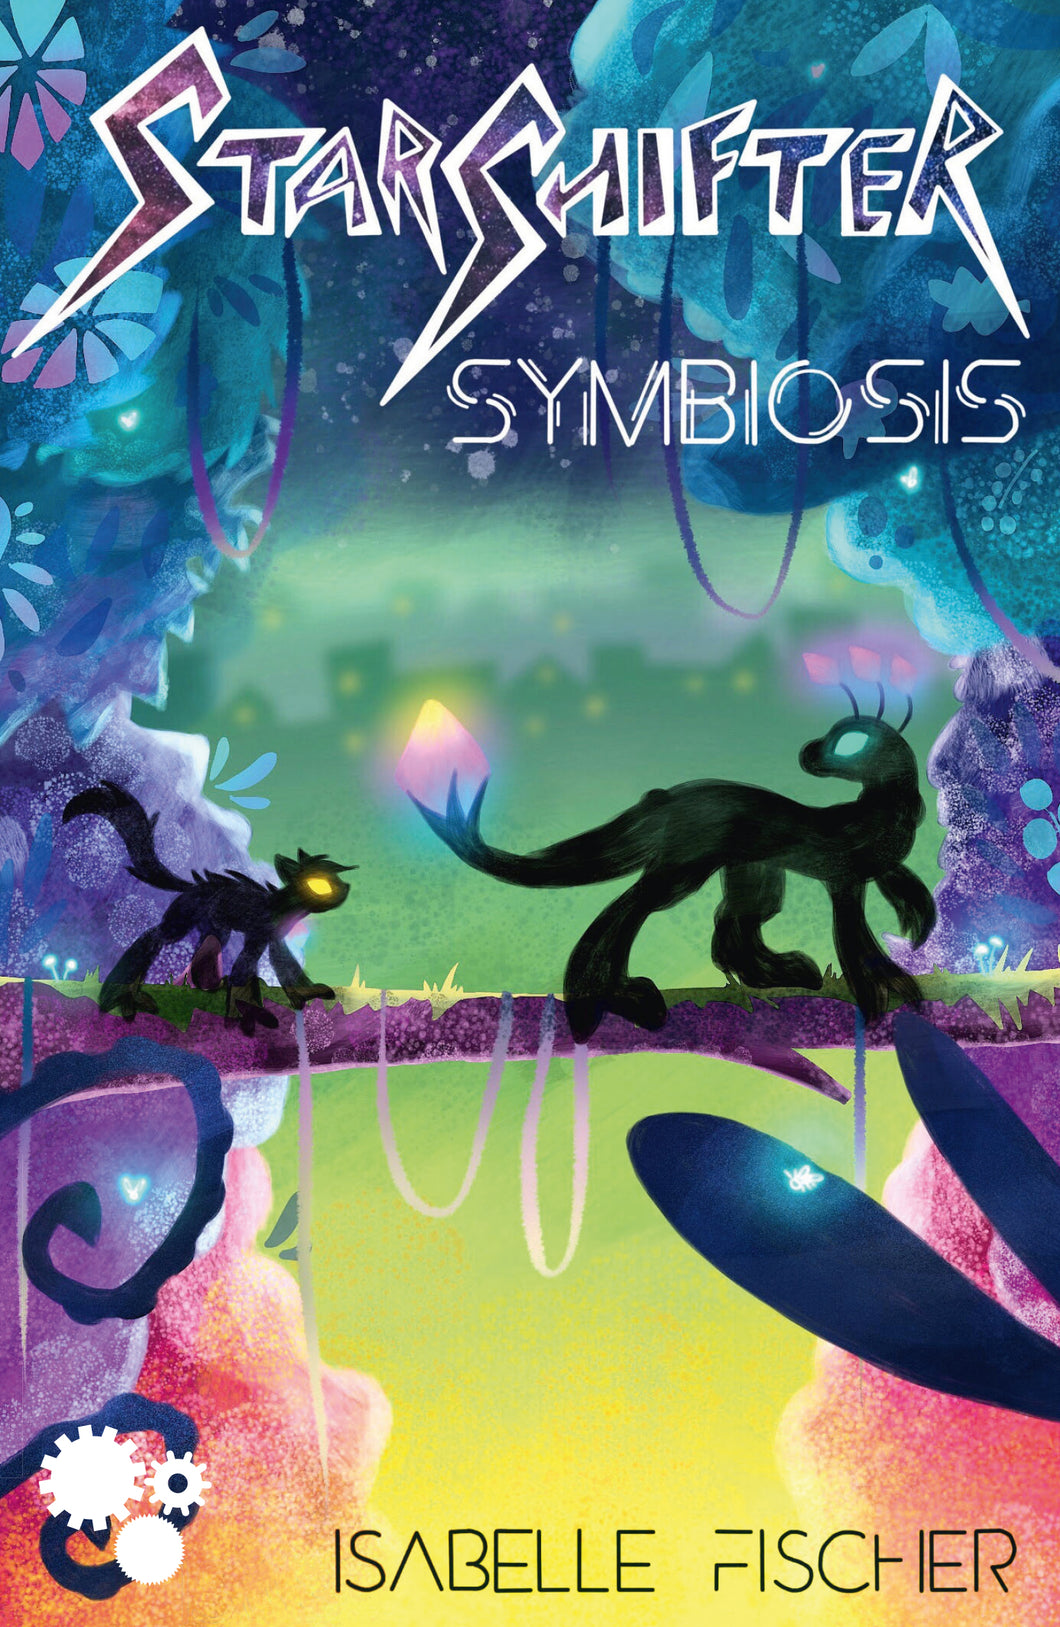 Starshifter Symbiosis (2018) by Isabelle Fischer